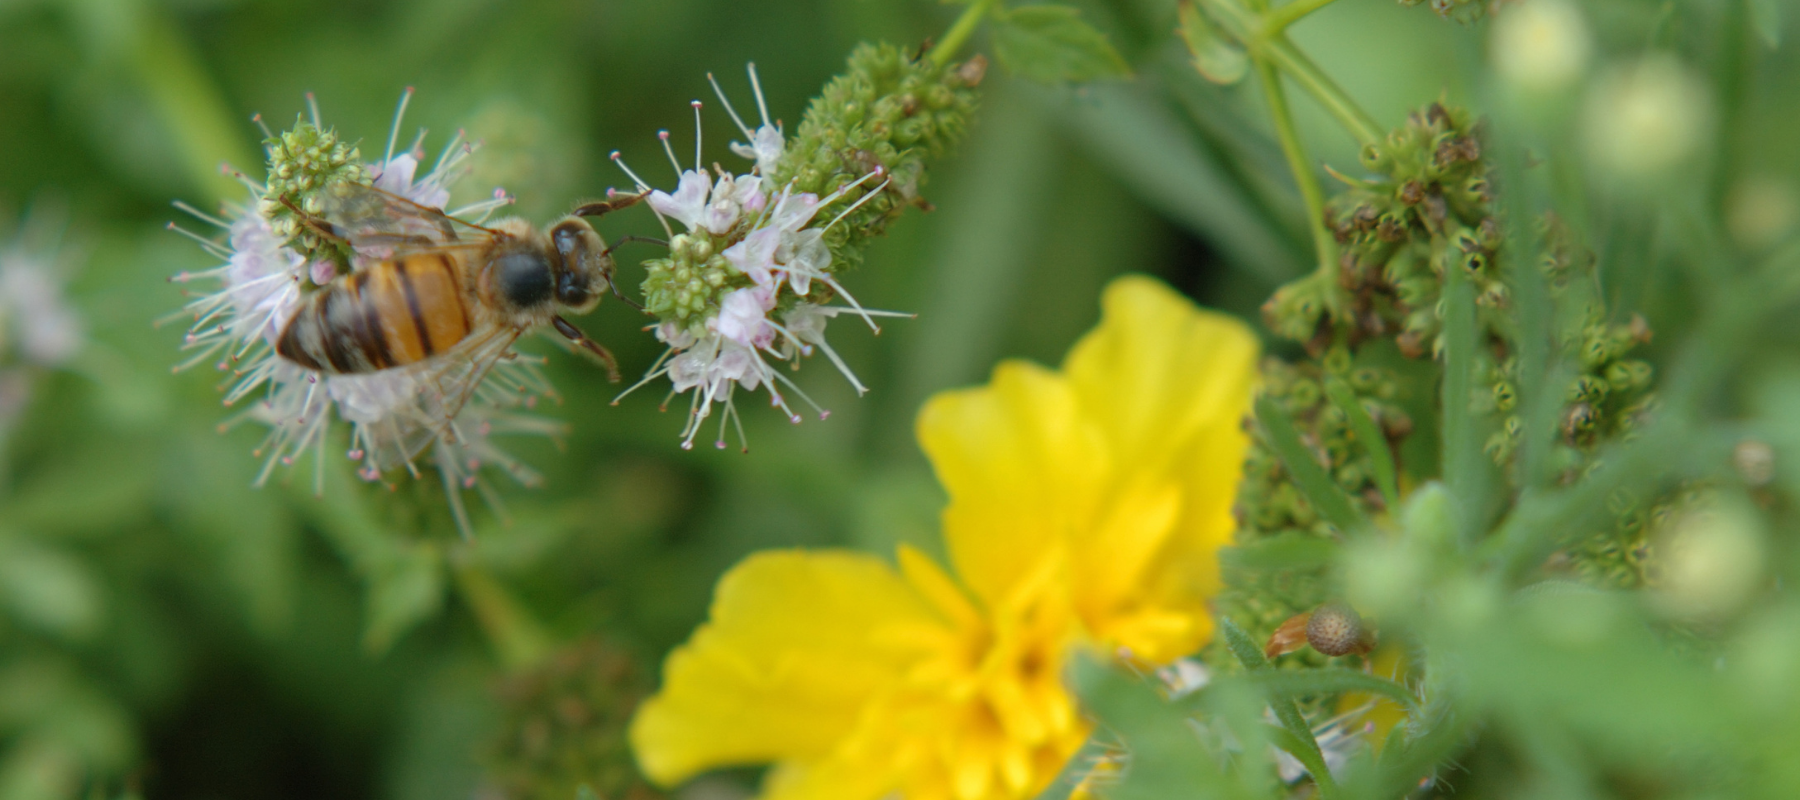 Companion planting attracts pollinators and repels pests